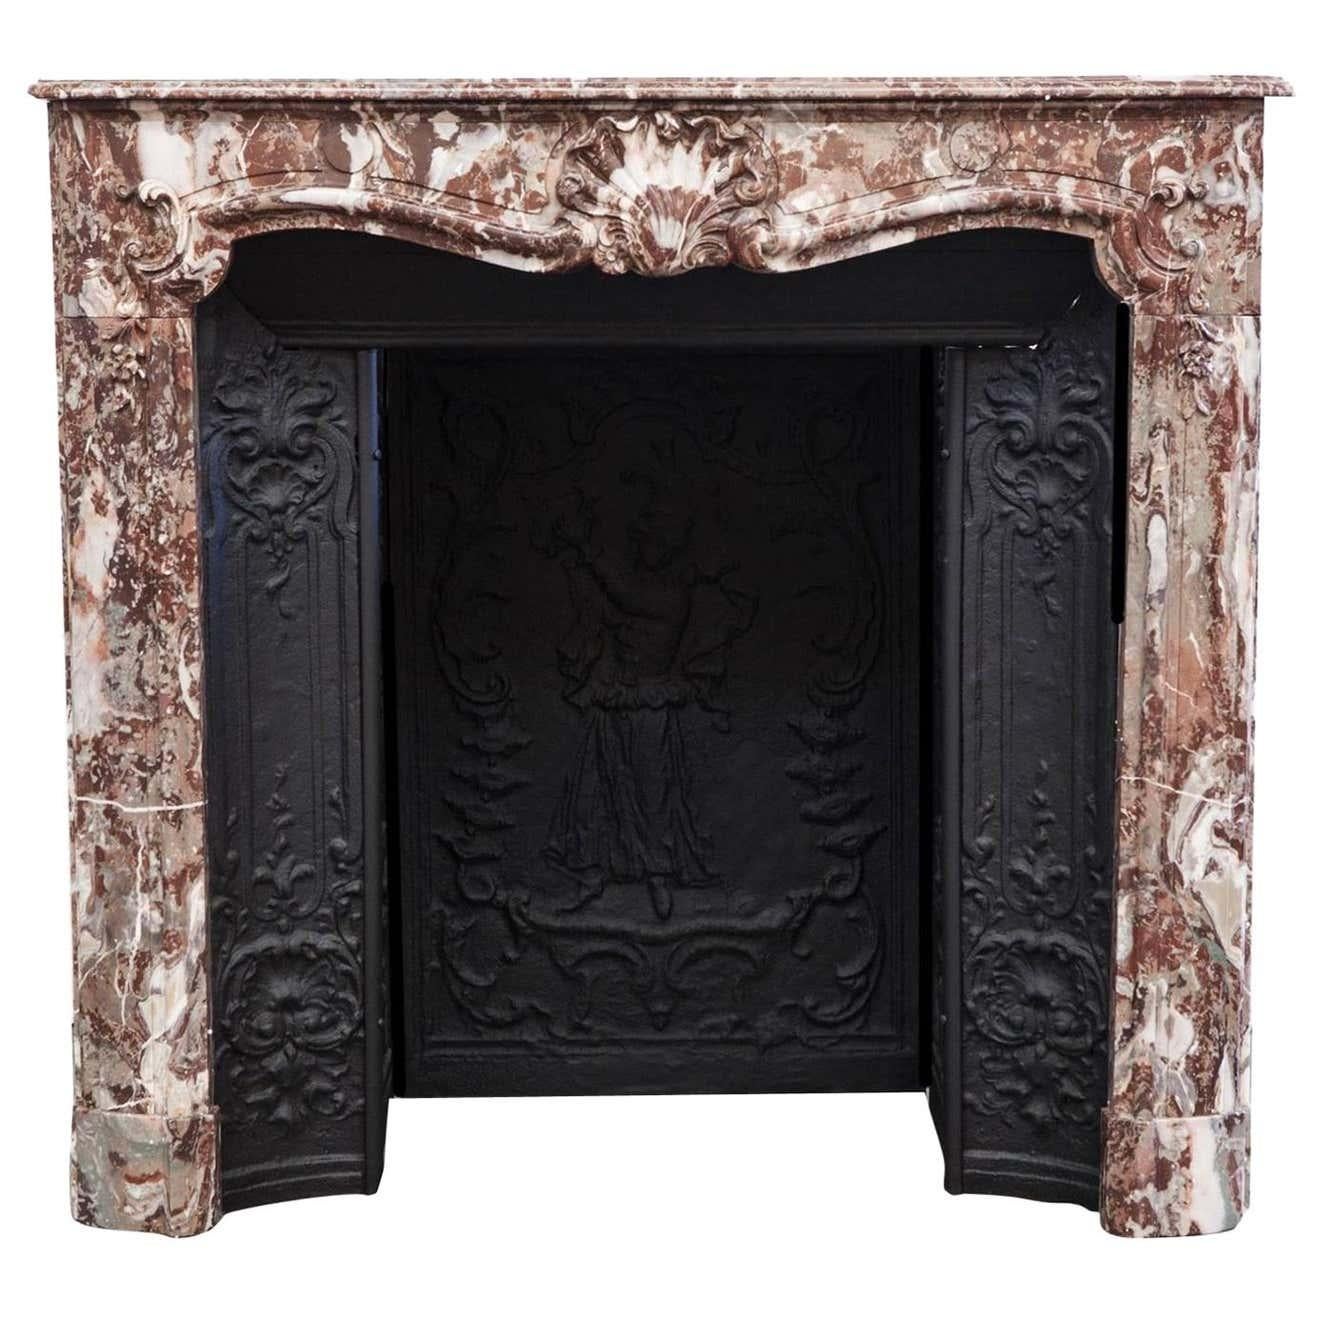 Beautiful late 18th century Louis XV Parisian rouge marble fireplace mantelpiece and cast-iron interior. This French fireplace mantel boasts a beautiful hand-carved shell centrepiece with detailed scrolls flagged along the frieze and jambs. The